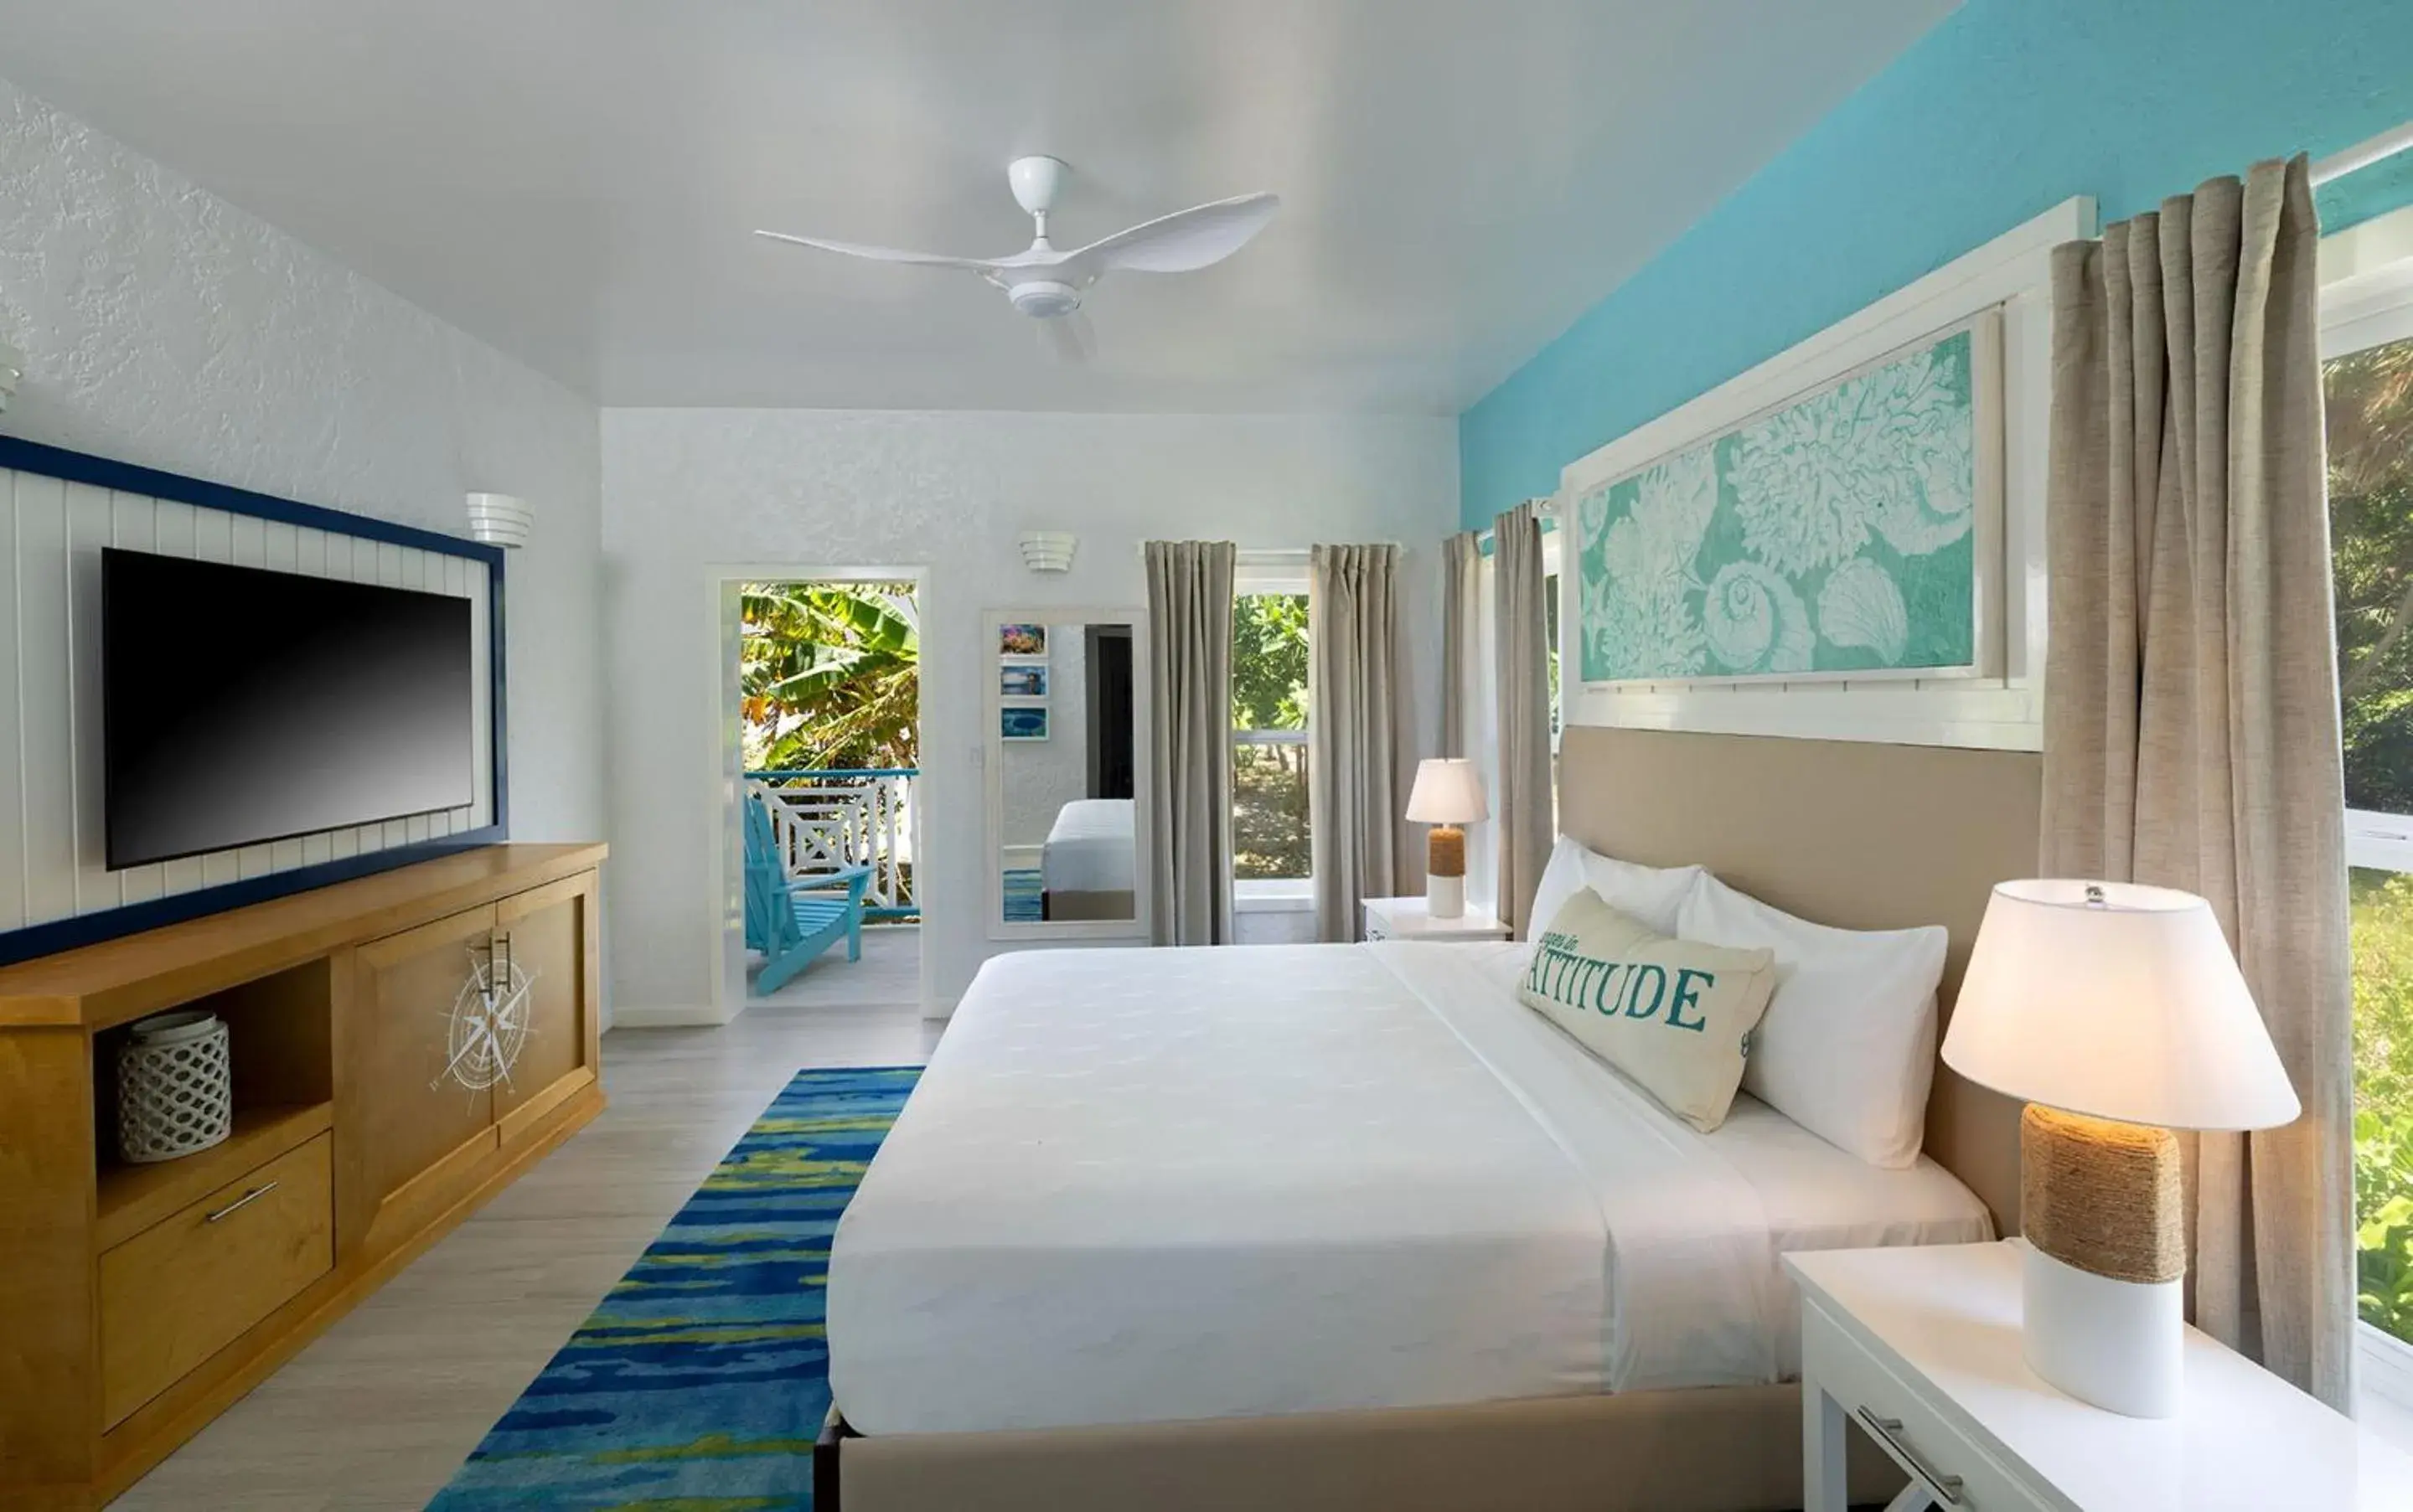 Photo of the whole room in Margaritaville Beach Resort Ambergris Caye - Belize